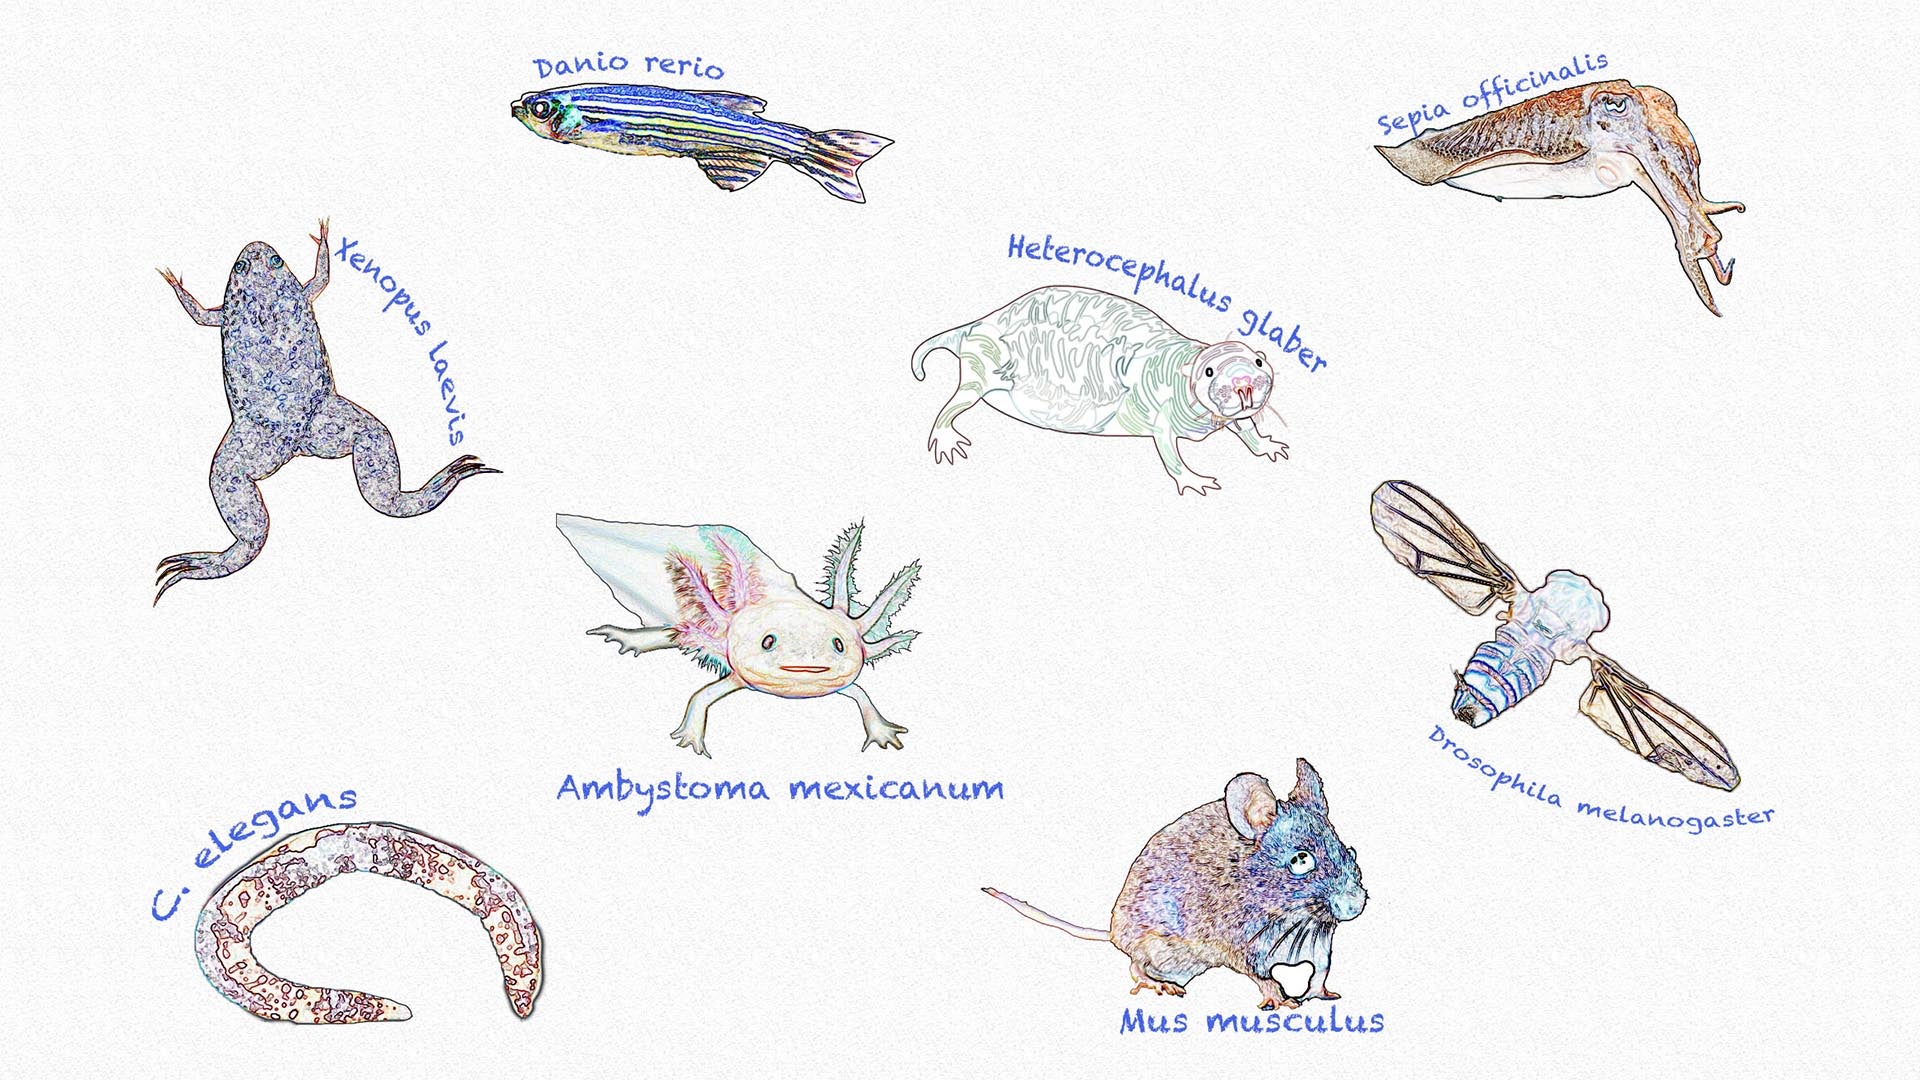 Image of model organisms used in research